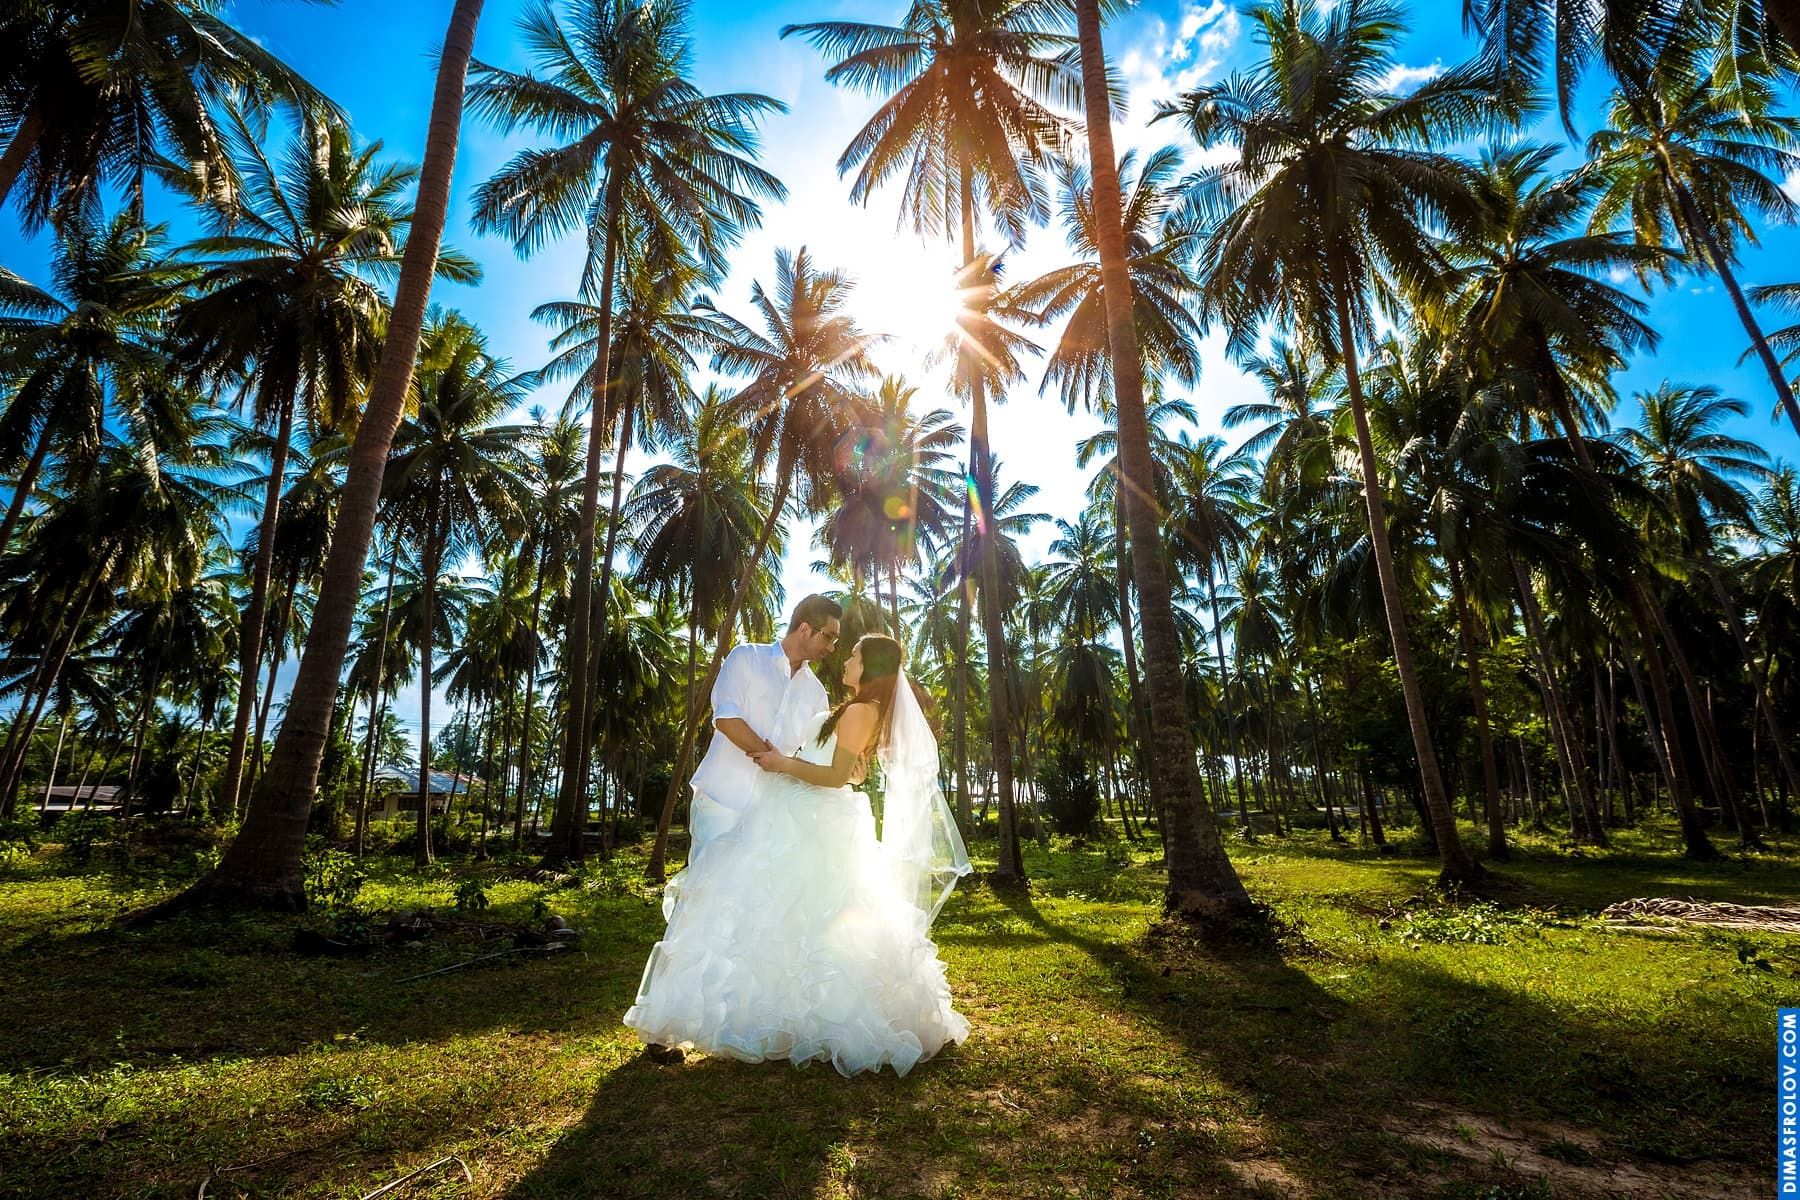 Coconut forest as location for photo shoot. photographer Dimas Frolov. photo1408